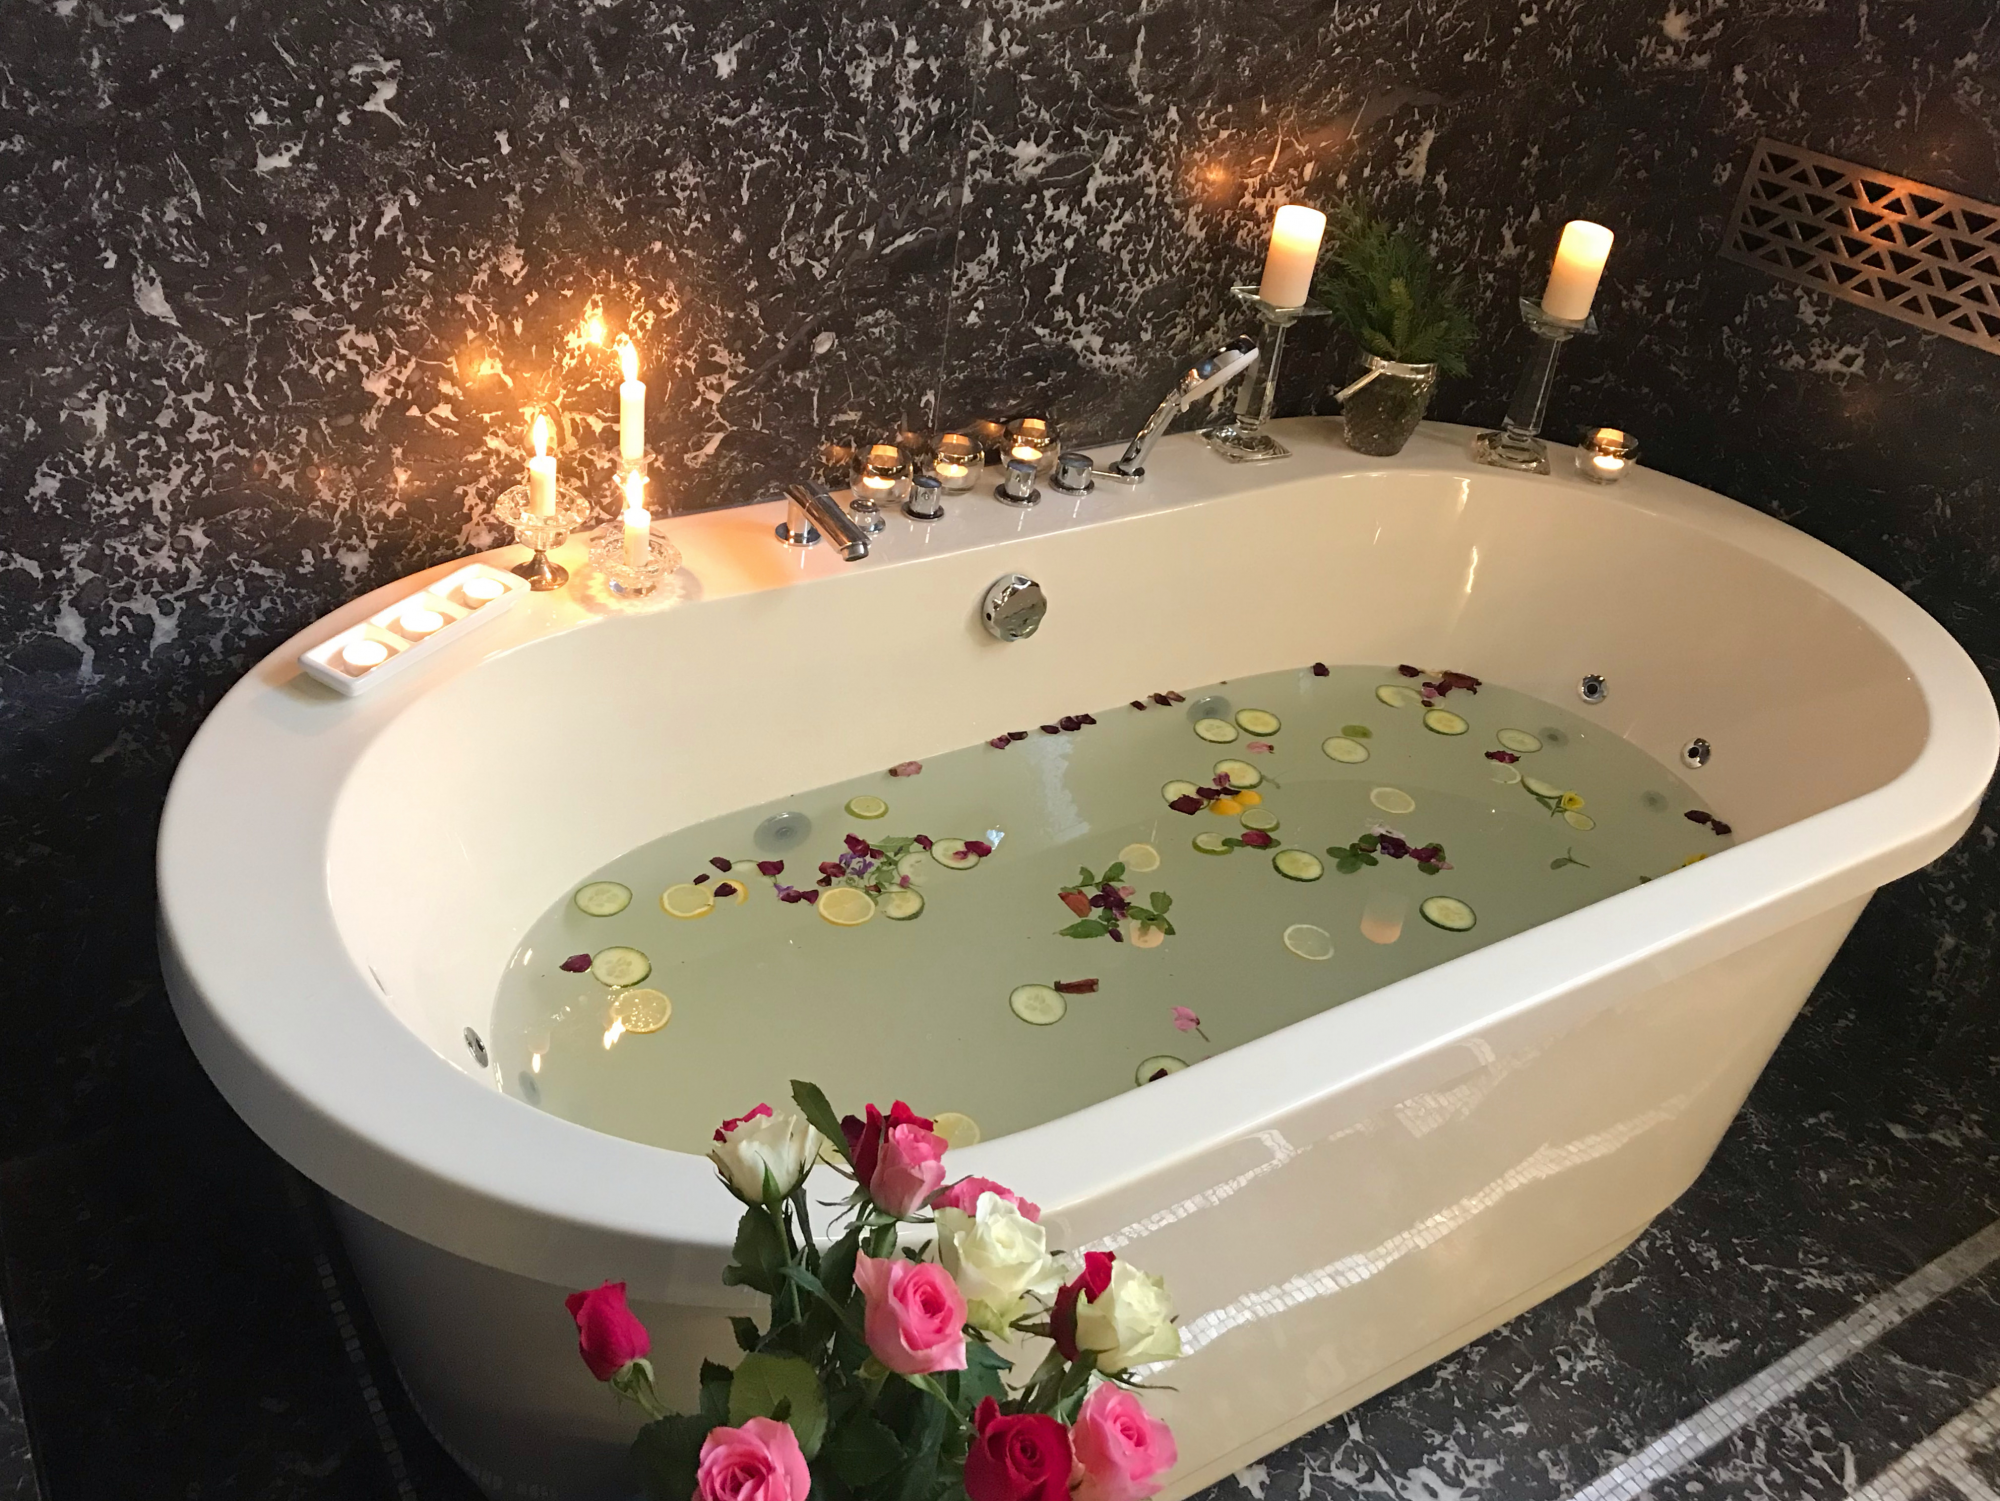 Authentic 1920's details are found in the Art Deco suite black marble bathroom with large soaking tub.  Why not try a citrus infused salt bath to rejuvenate and restore your energy after a day of touring?